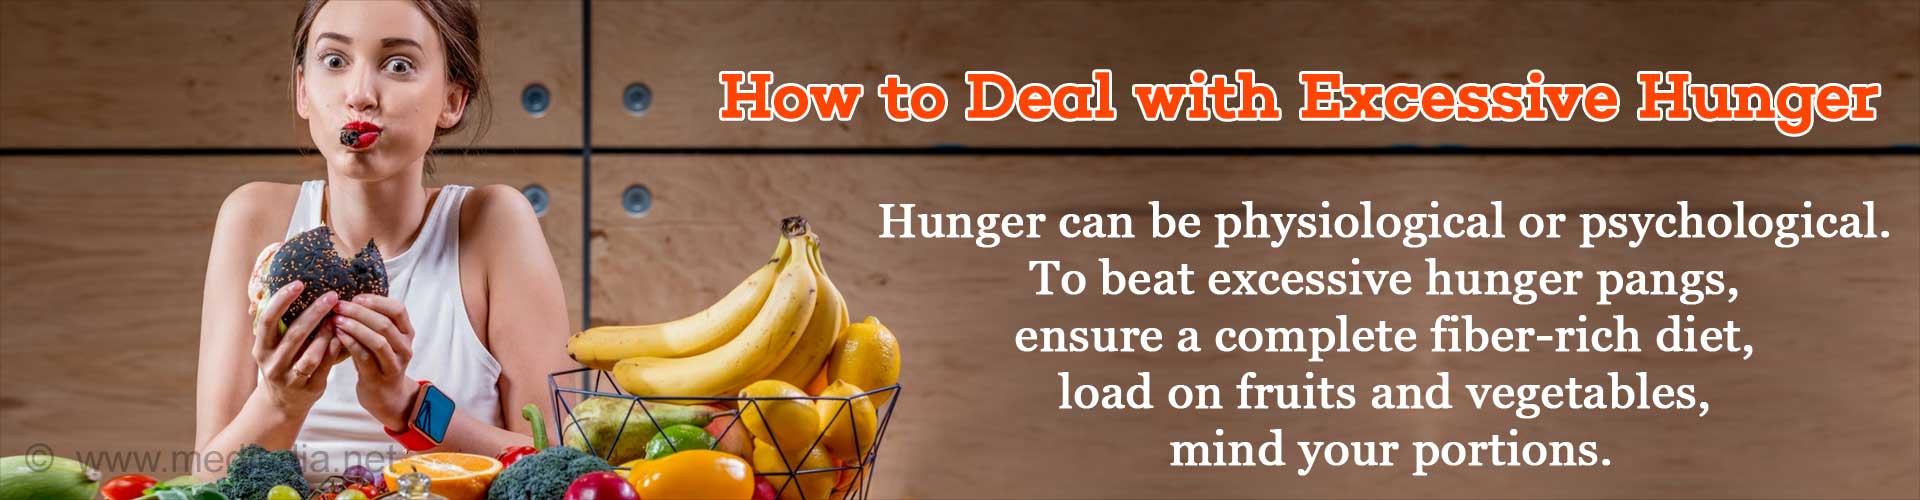 How to Deal with Excessive Hunger
- Hunger can be physiological or psychological. To beat excessive hunger pangs, ensure a complete fiber-rich diet, load on fruits and vegetables, mind your portions.